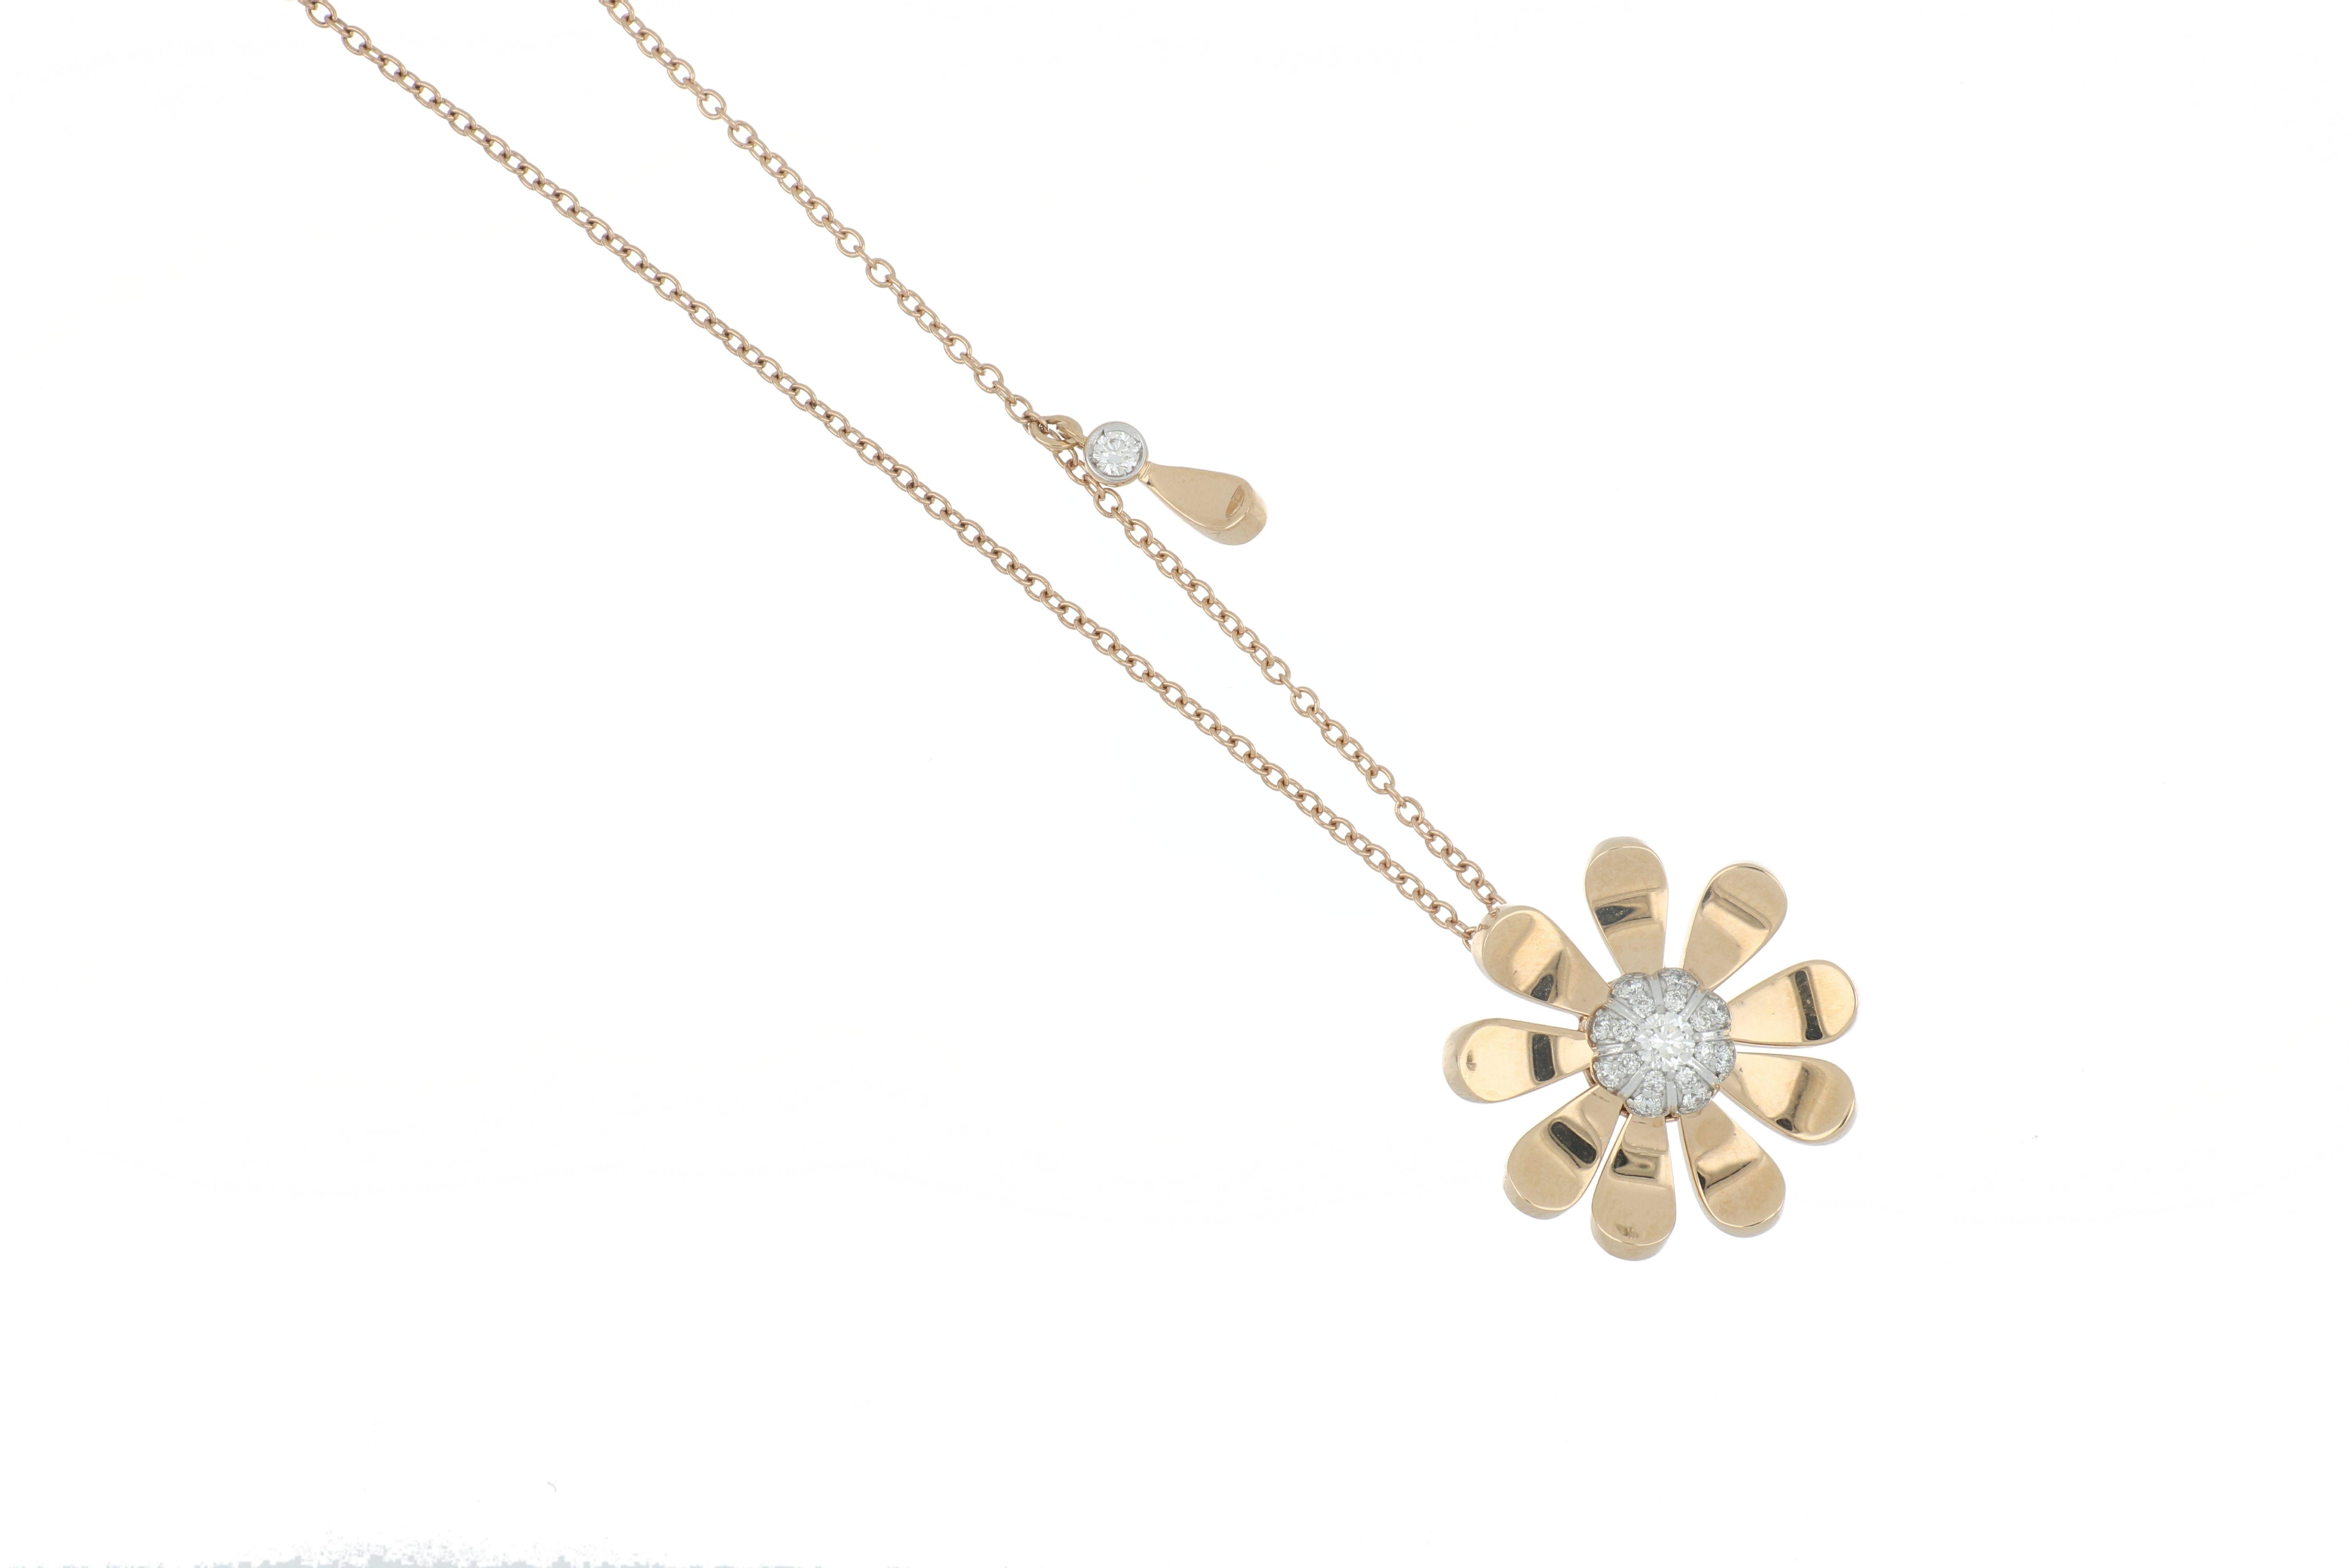 This gorgeous and delicate pendant was inspired by daisies and their simple and classic design. Exuding innocence, purity, and beauty this pendant captivates the charm and radiance of a daisy. This pendant has moveable parts and it is 18k rose gold